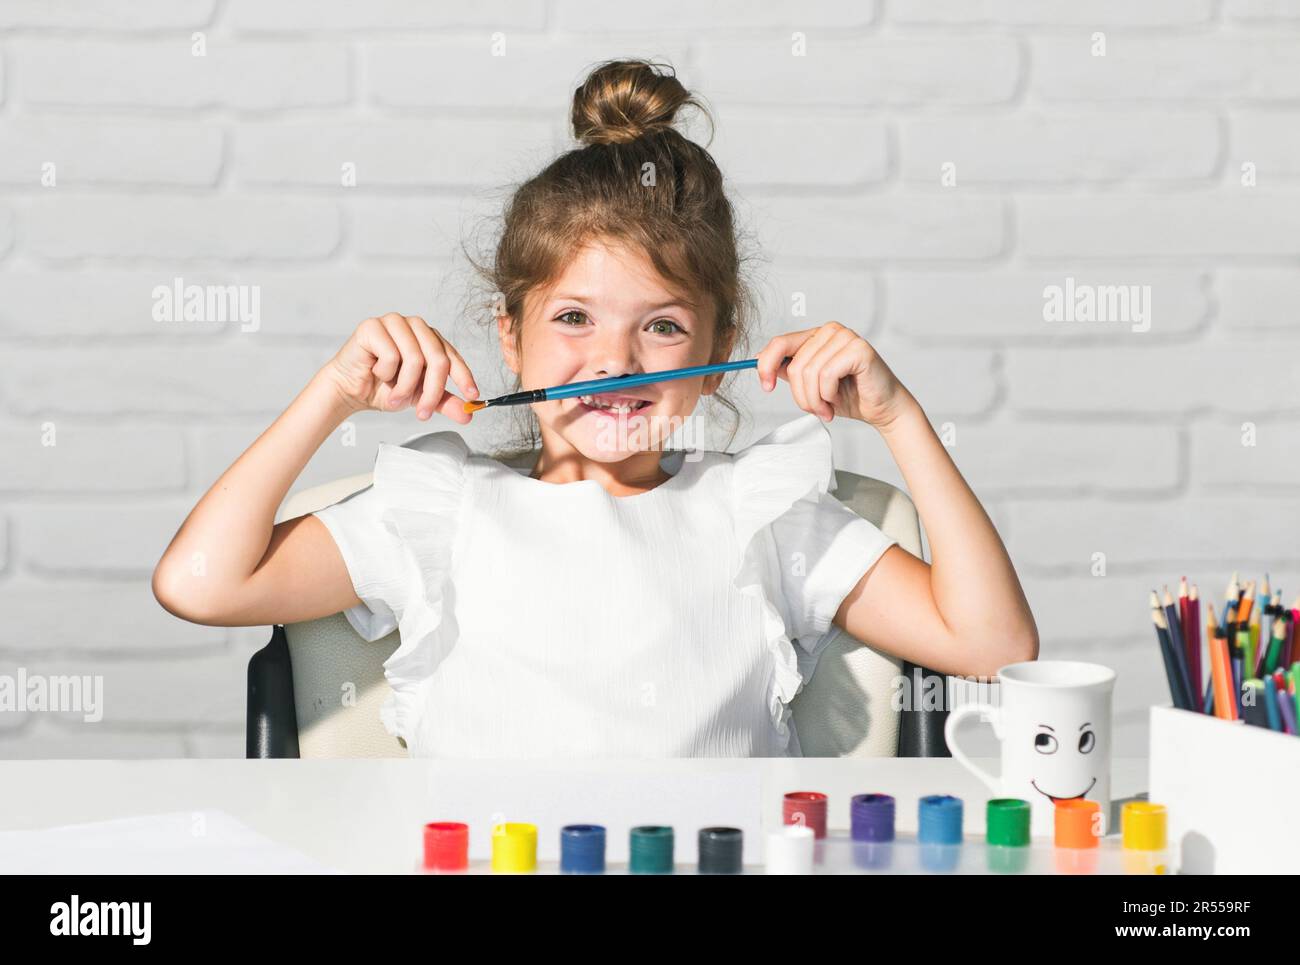 https://c8.alamy.com/comp/2R559RF/funny-kids-emotions-cute-little-preschooler-child-girl-drawing-at-school-child-girl-painting-on-elementary-school-kids-early-arts-and-crafts-2R559RF.jpg